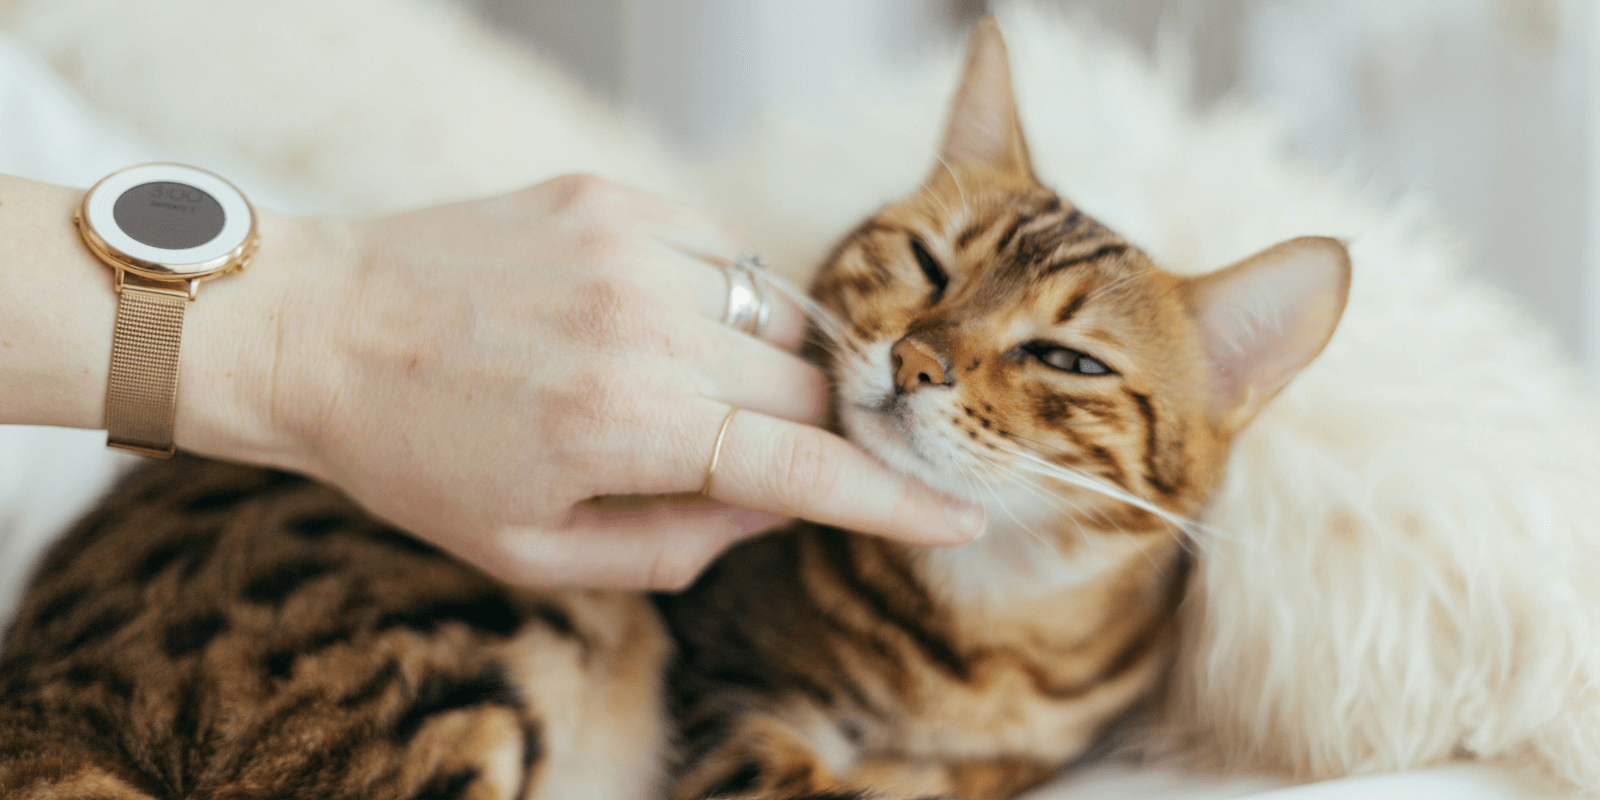 Human hand petting under the chin of a brown and black cat